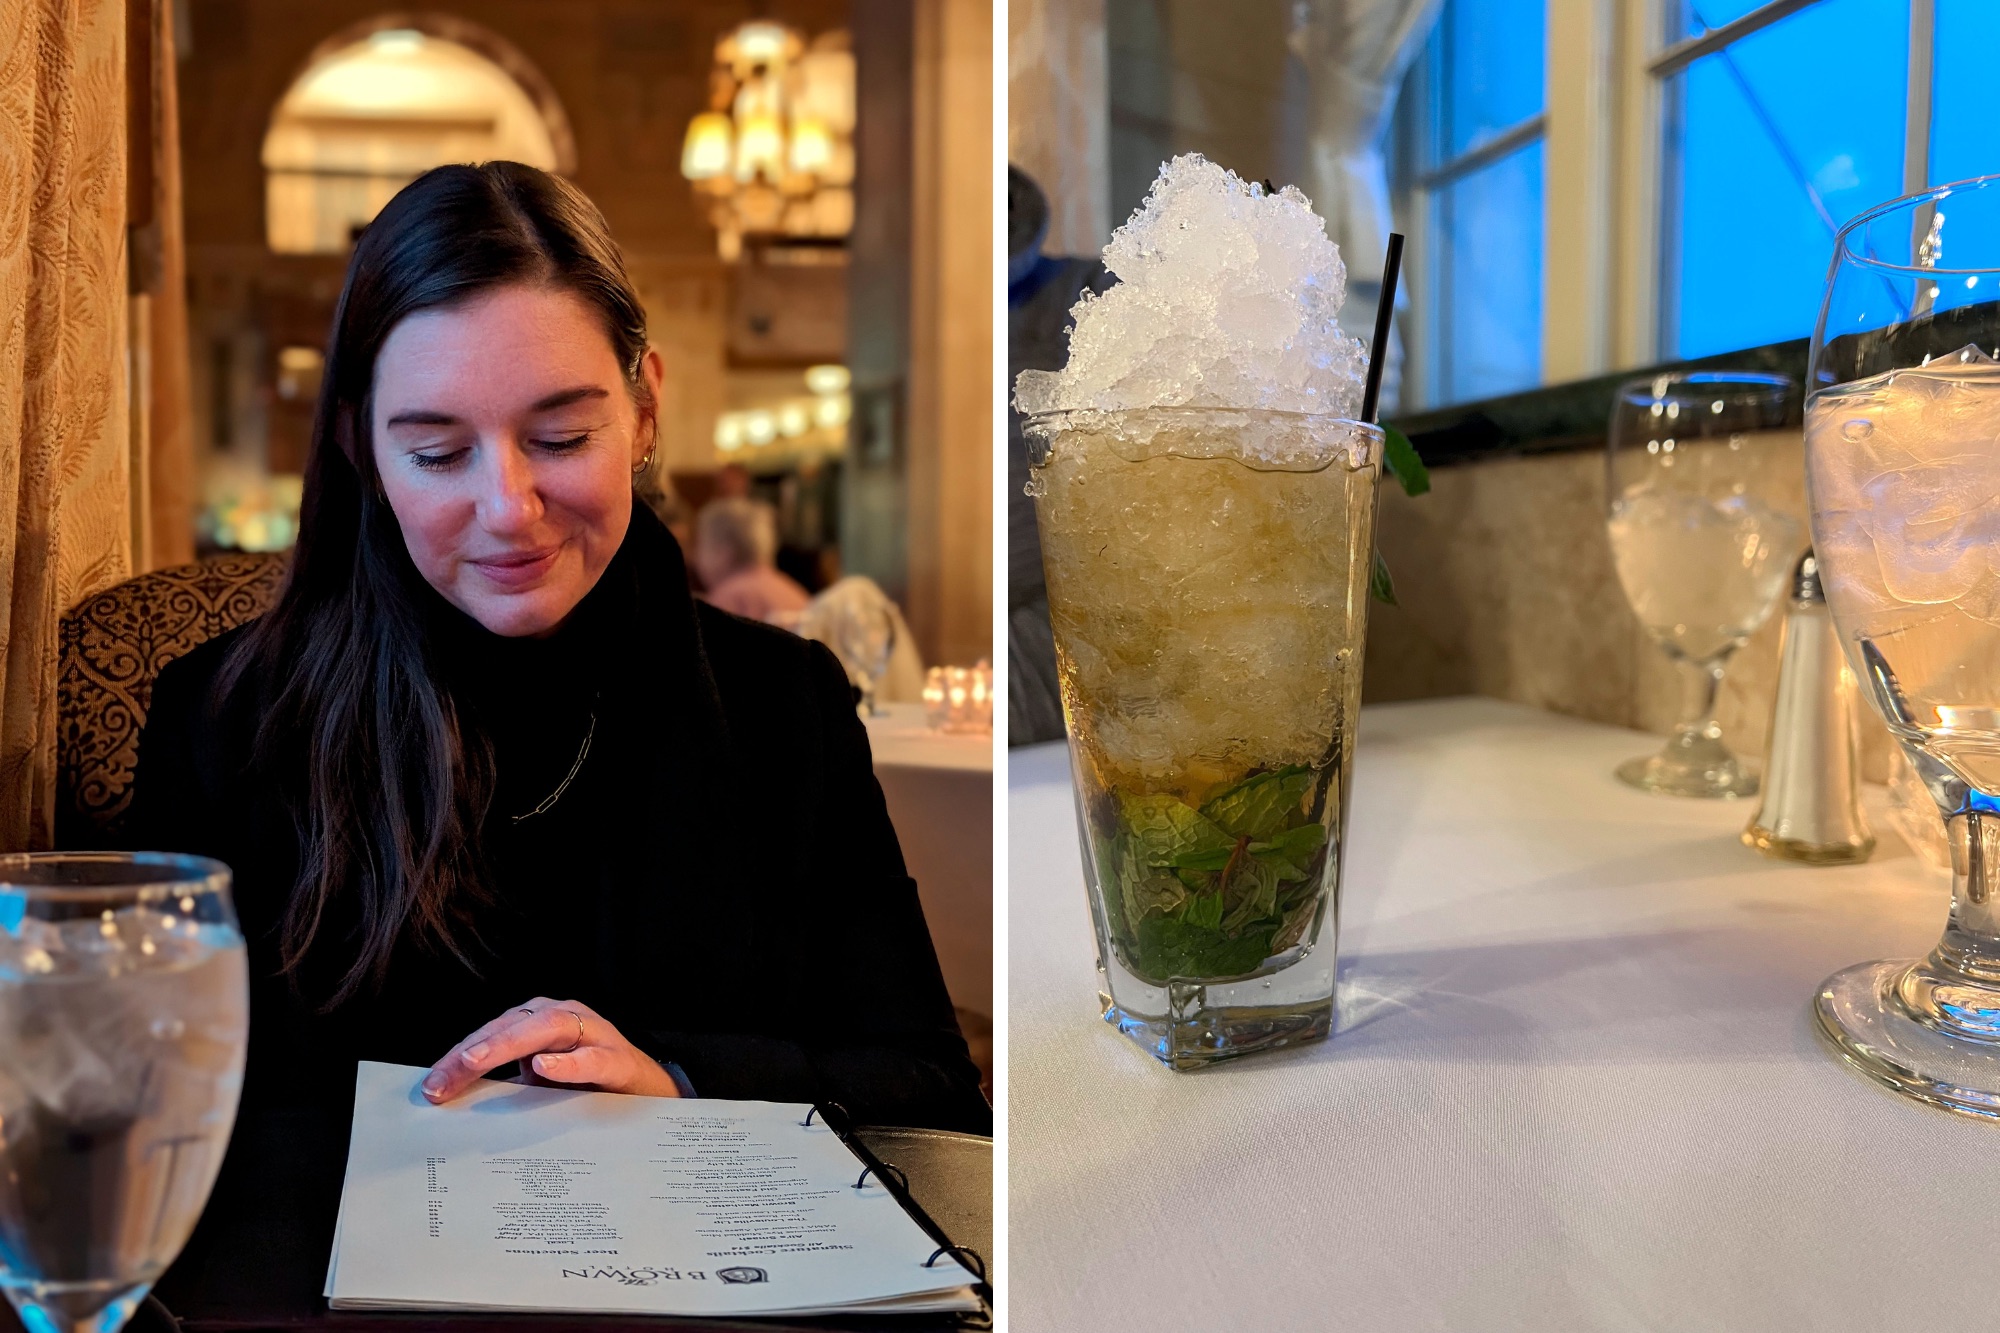 Alyssa looks over the menu at The Brown Hotel; a mint julep